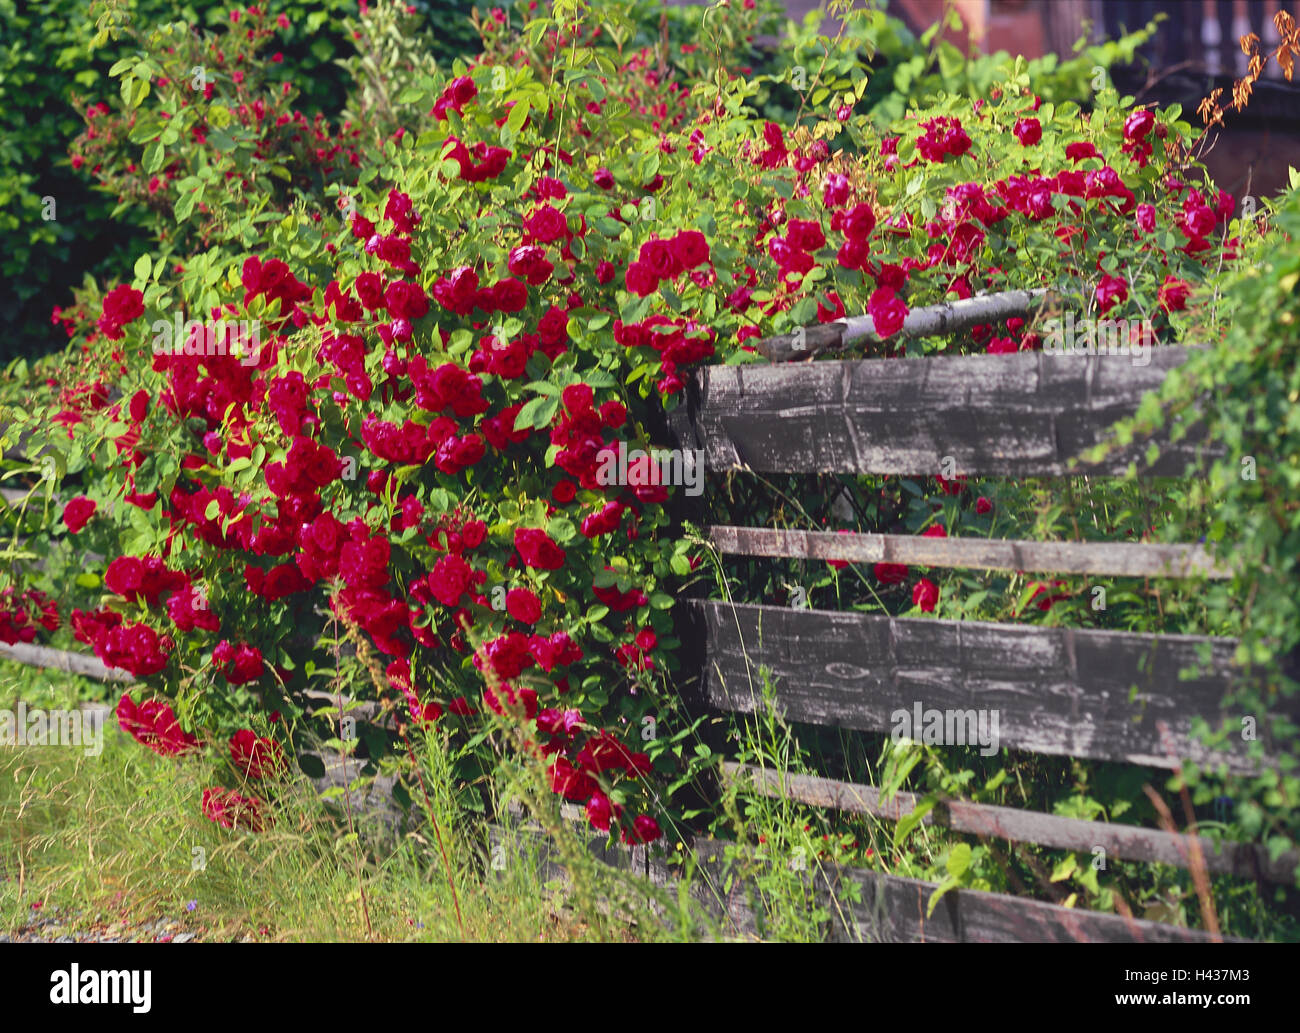 Fence, climbing roses, red, blossom, garden, garden fence, fence, boards, Wooden fence, Wooden boards, plant, flowers, roses, summers, blossoms, rose blossoms, Stock Photo